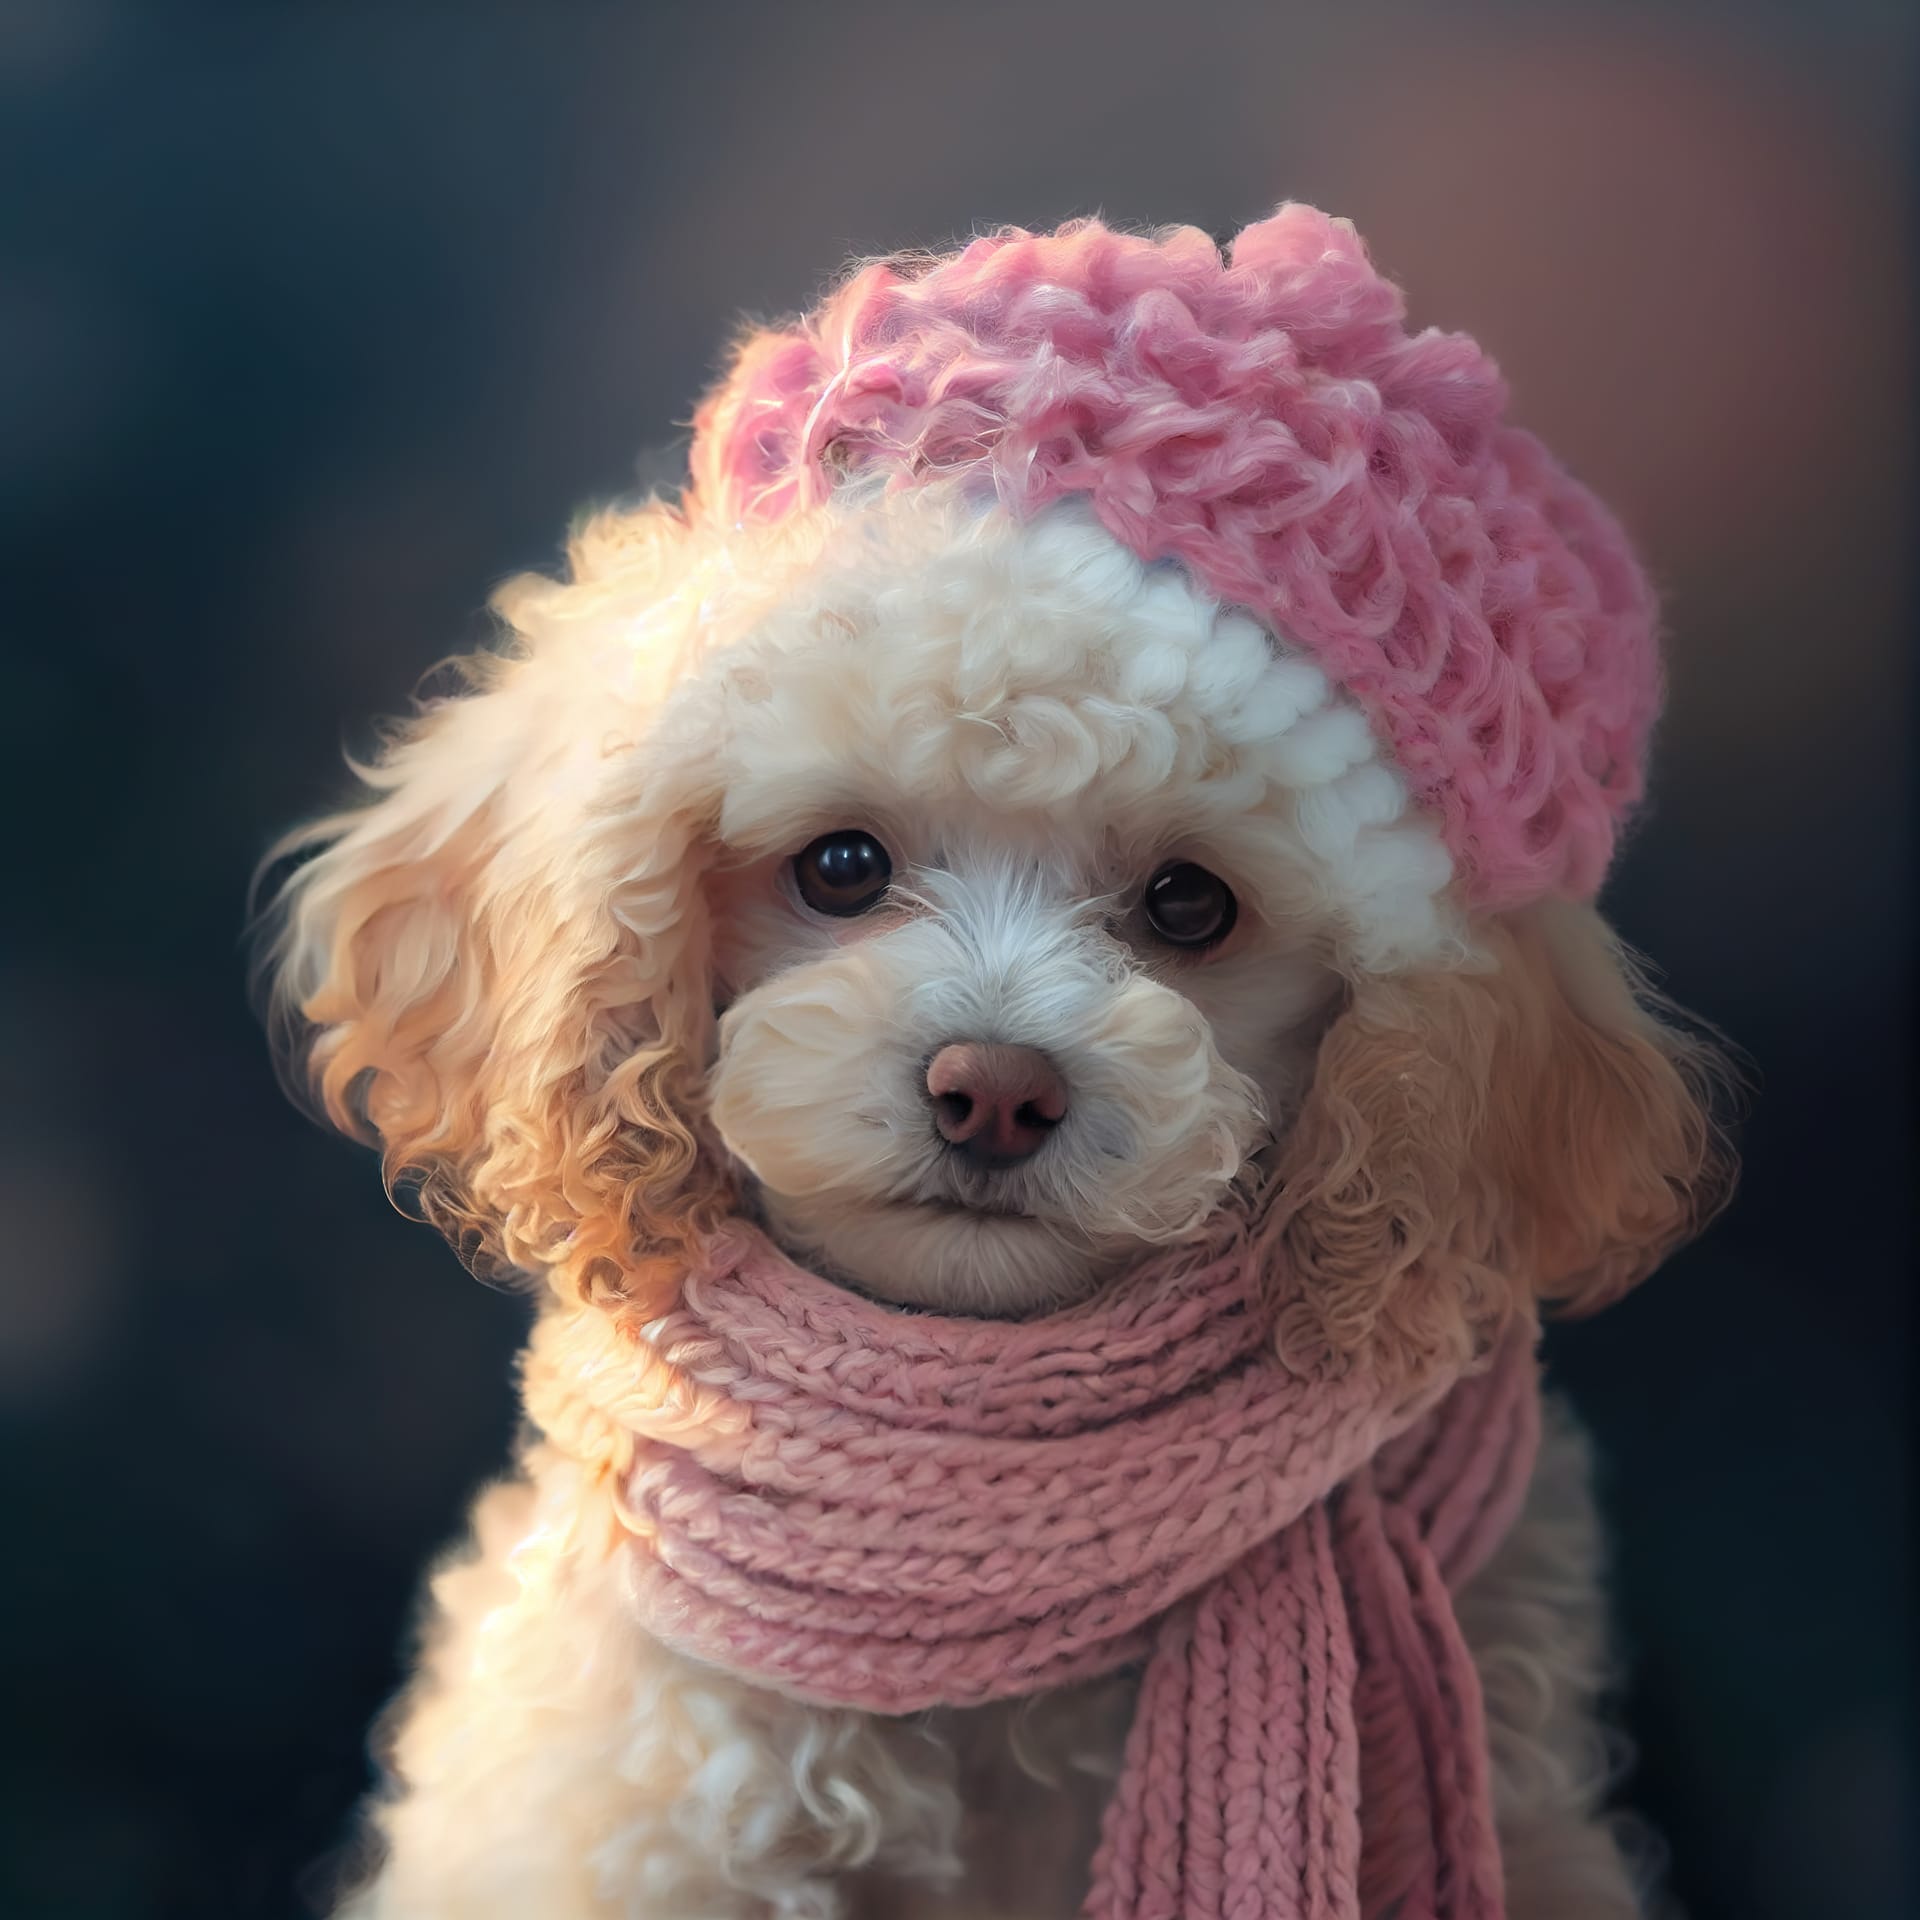 White poodle dog sitting winter park pink knitted hat scarf